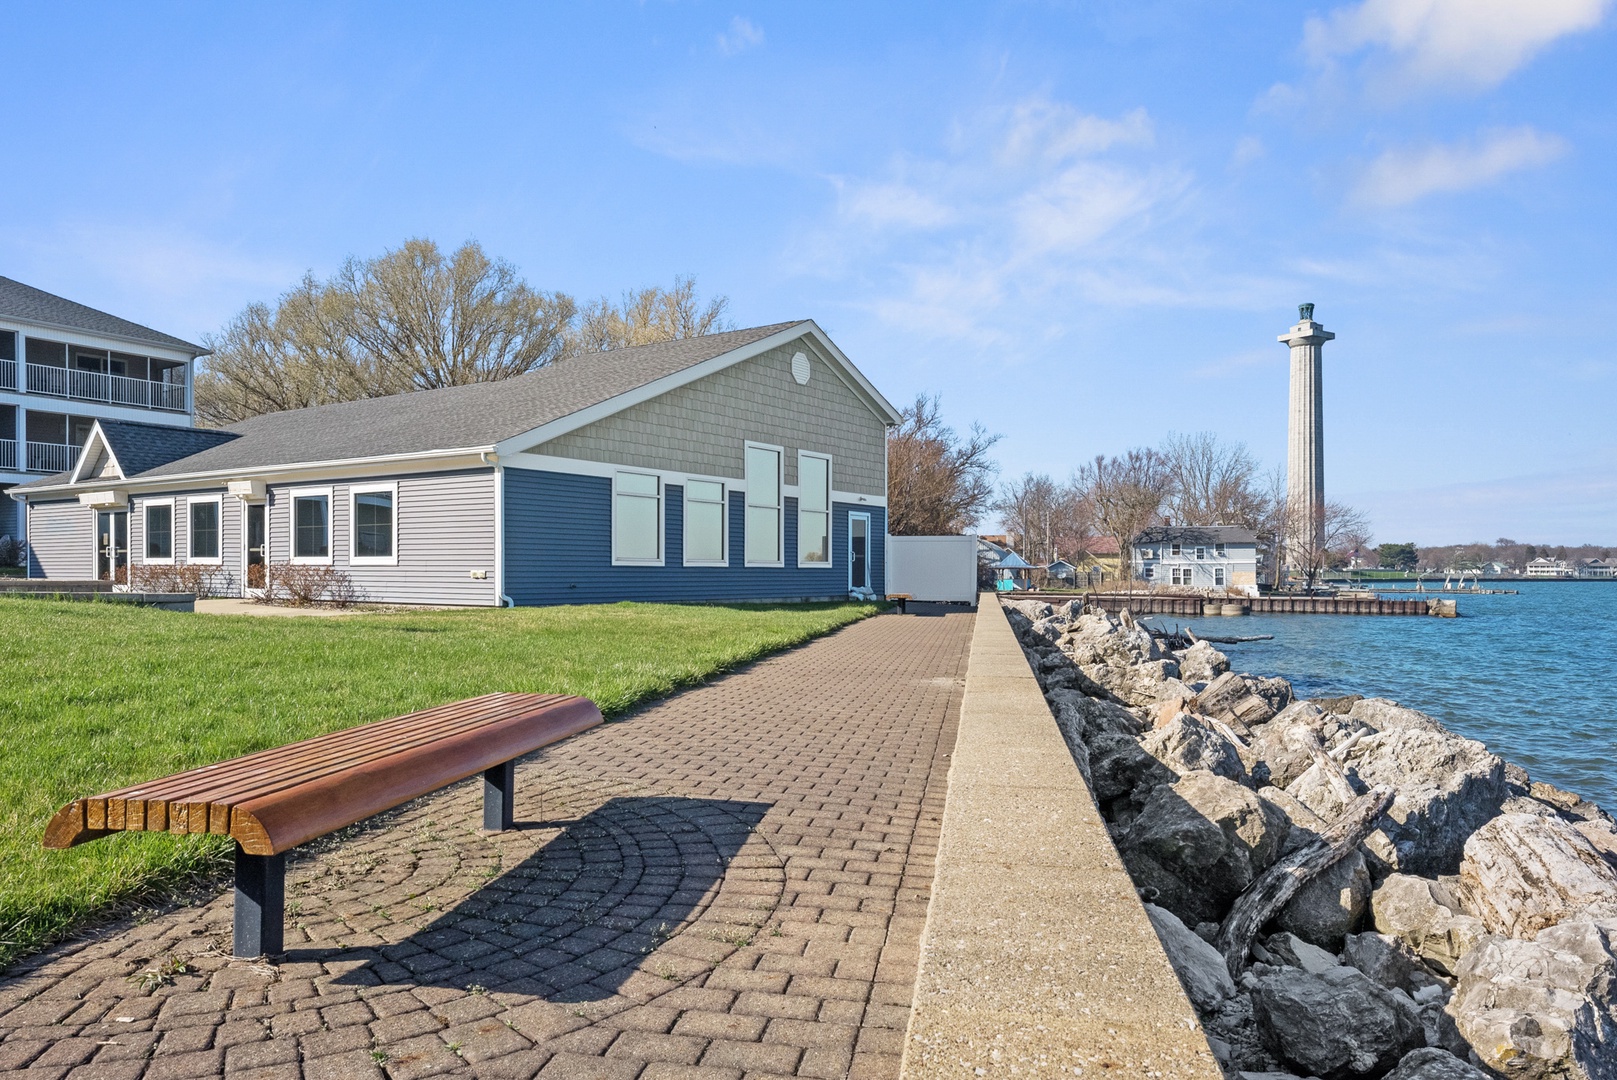 Upgrade Your Put-In-Bay Vacation with Our Serene Lakefront Getaway